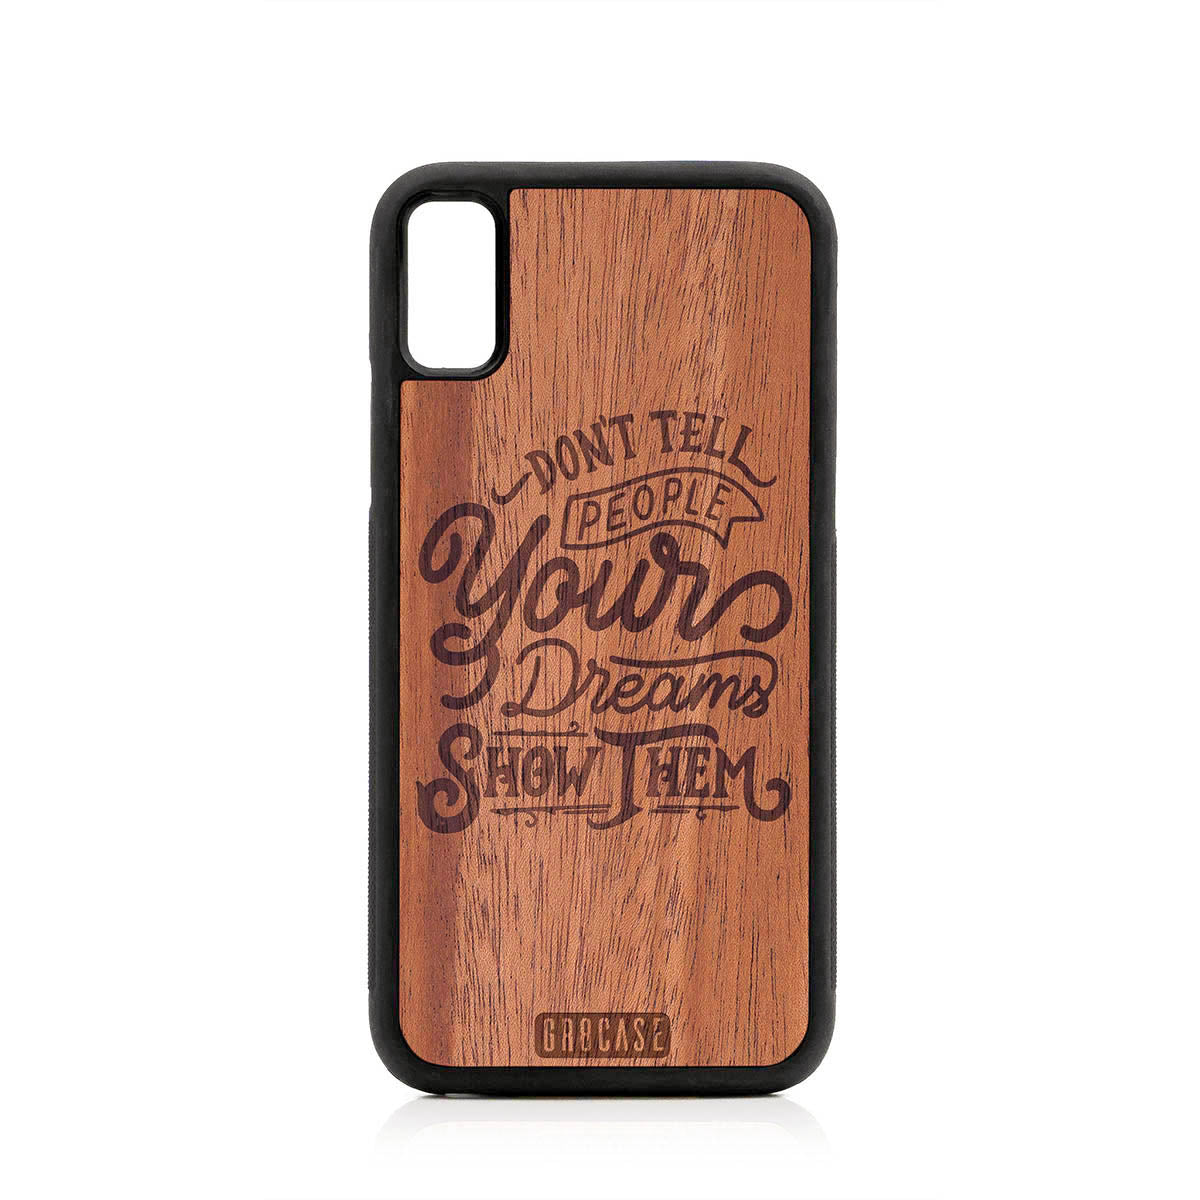 Don't Tell People Your Dreams Show Them Design Wood Case For iPhone XS Max by GR8CASE